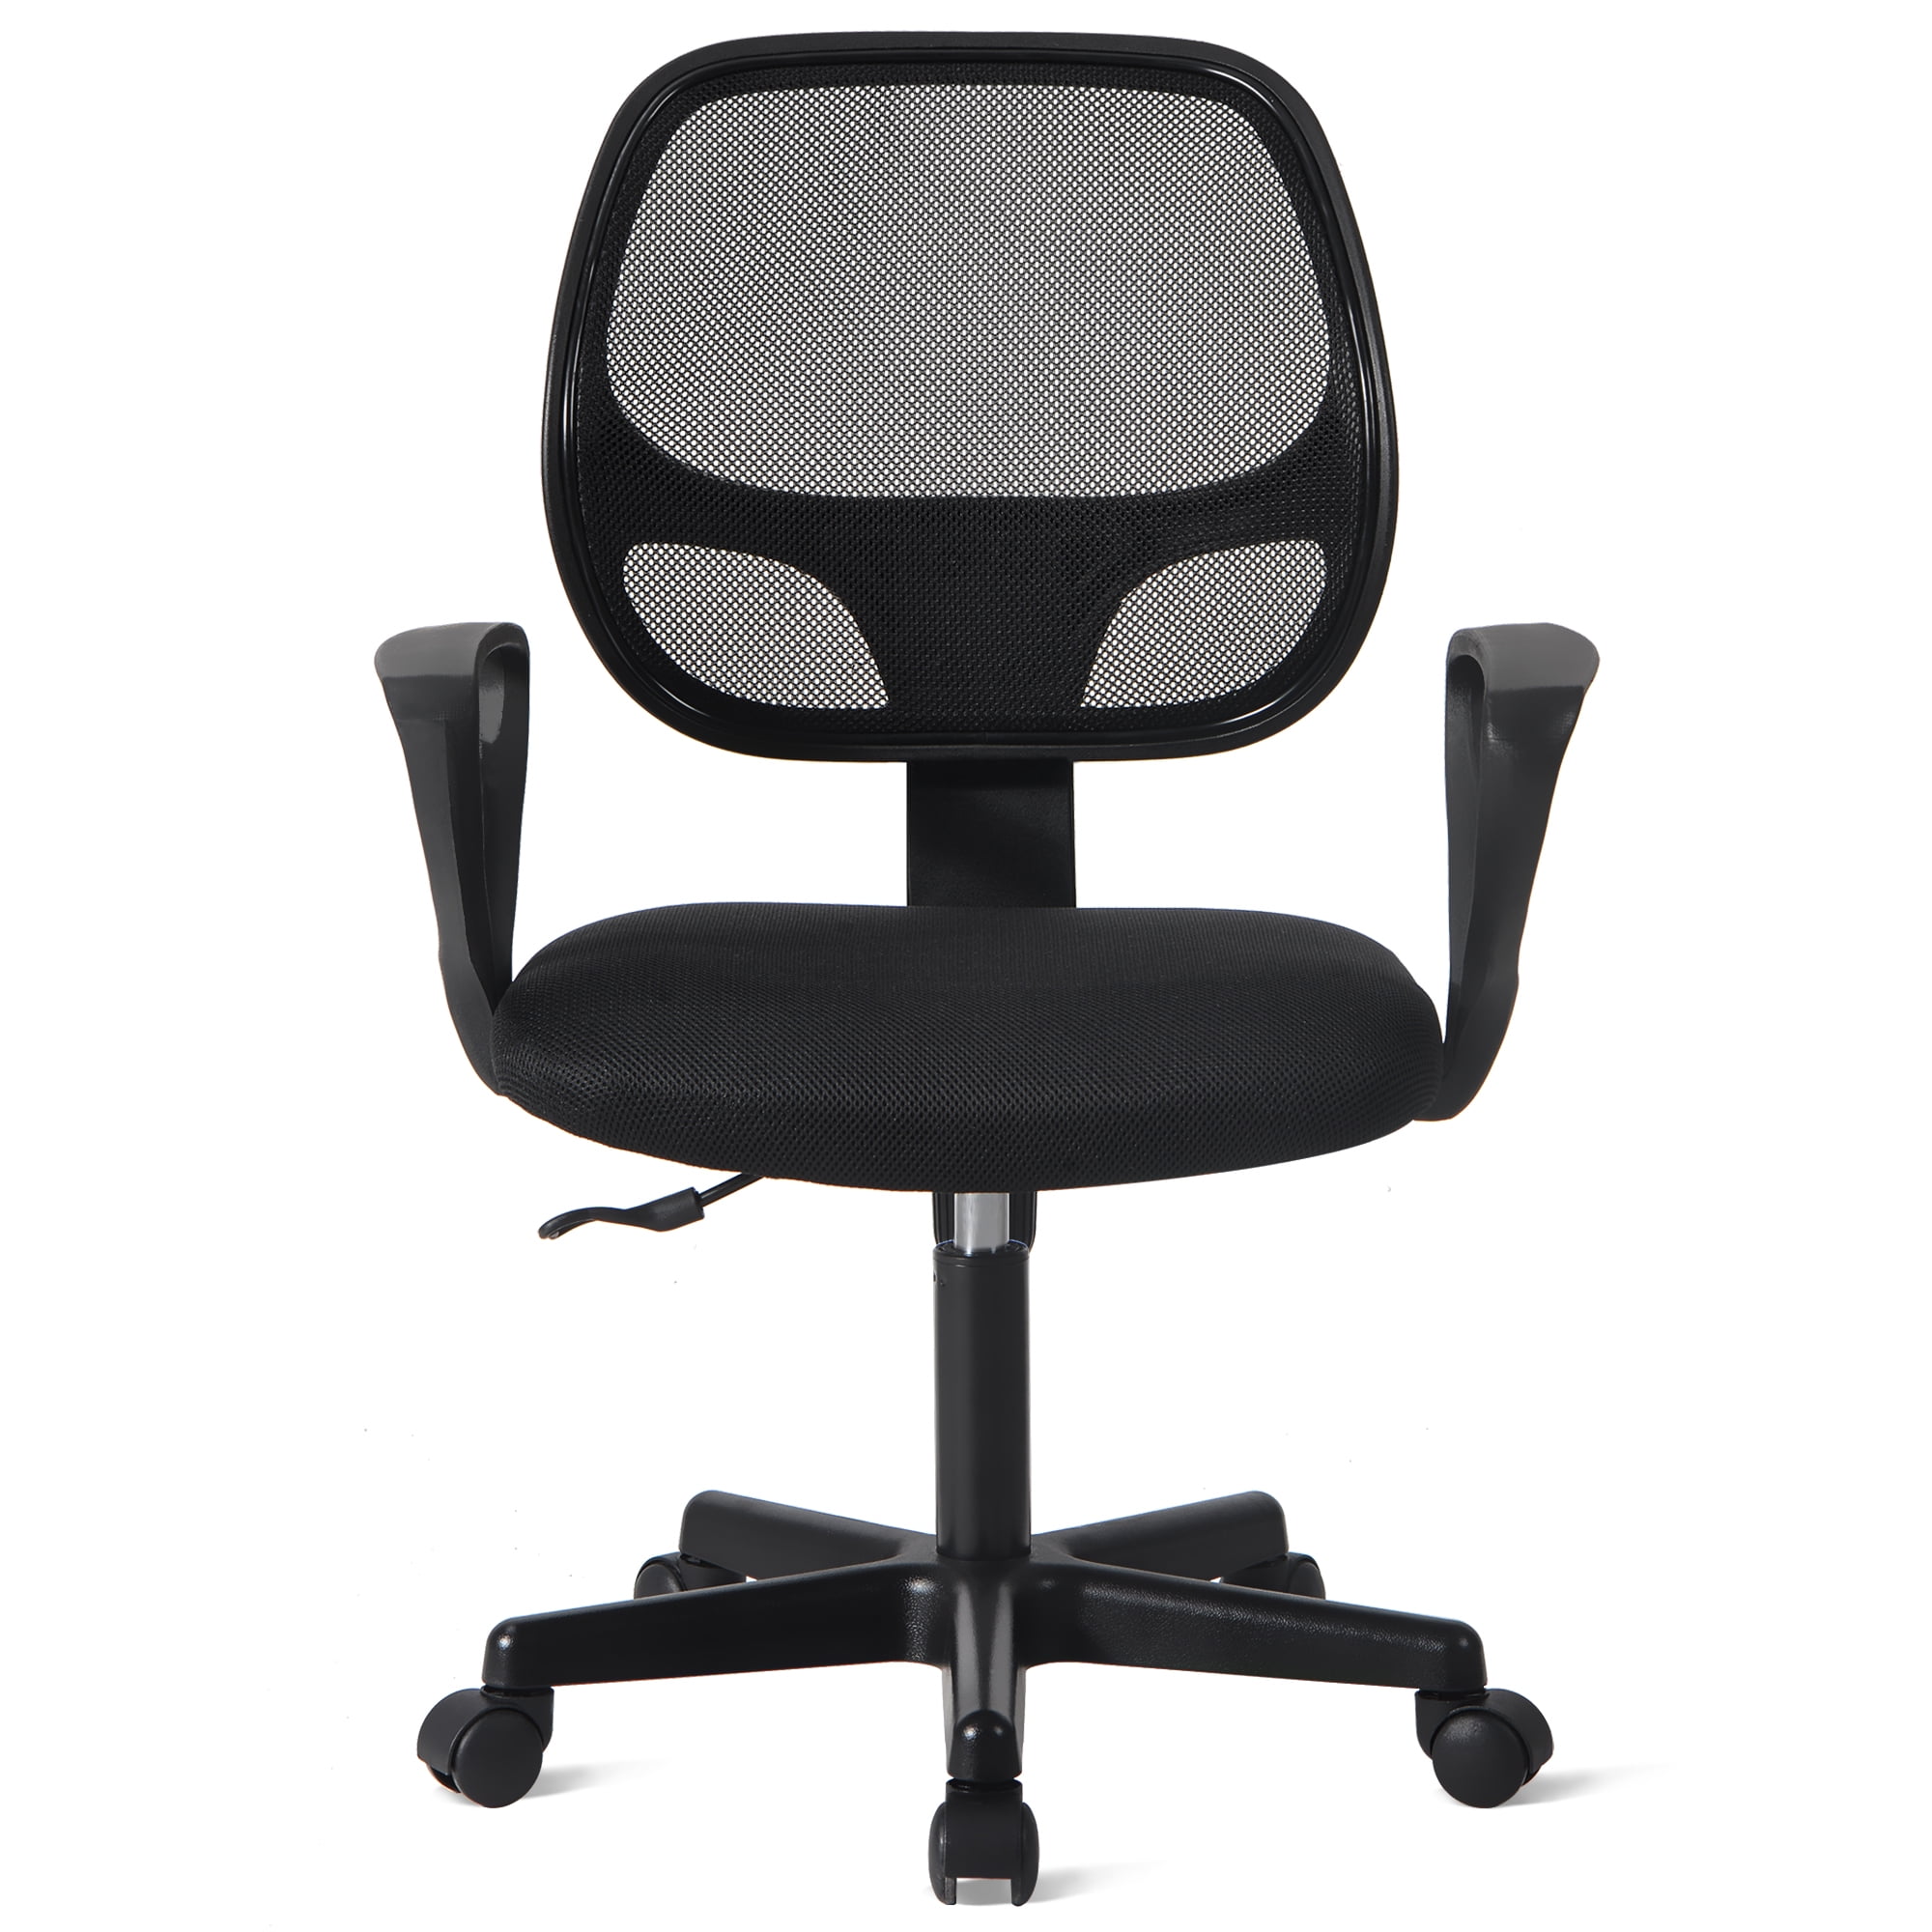 1X Black Rotating Office Mesh Desk Adjustable Task Chair With Torsion Control 